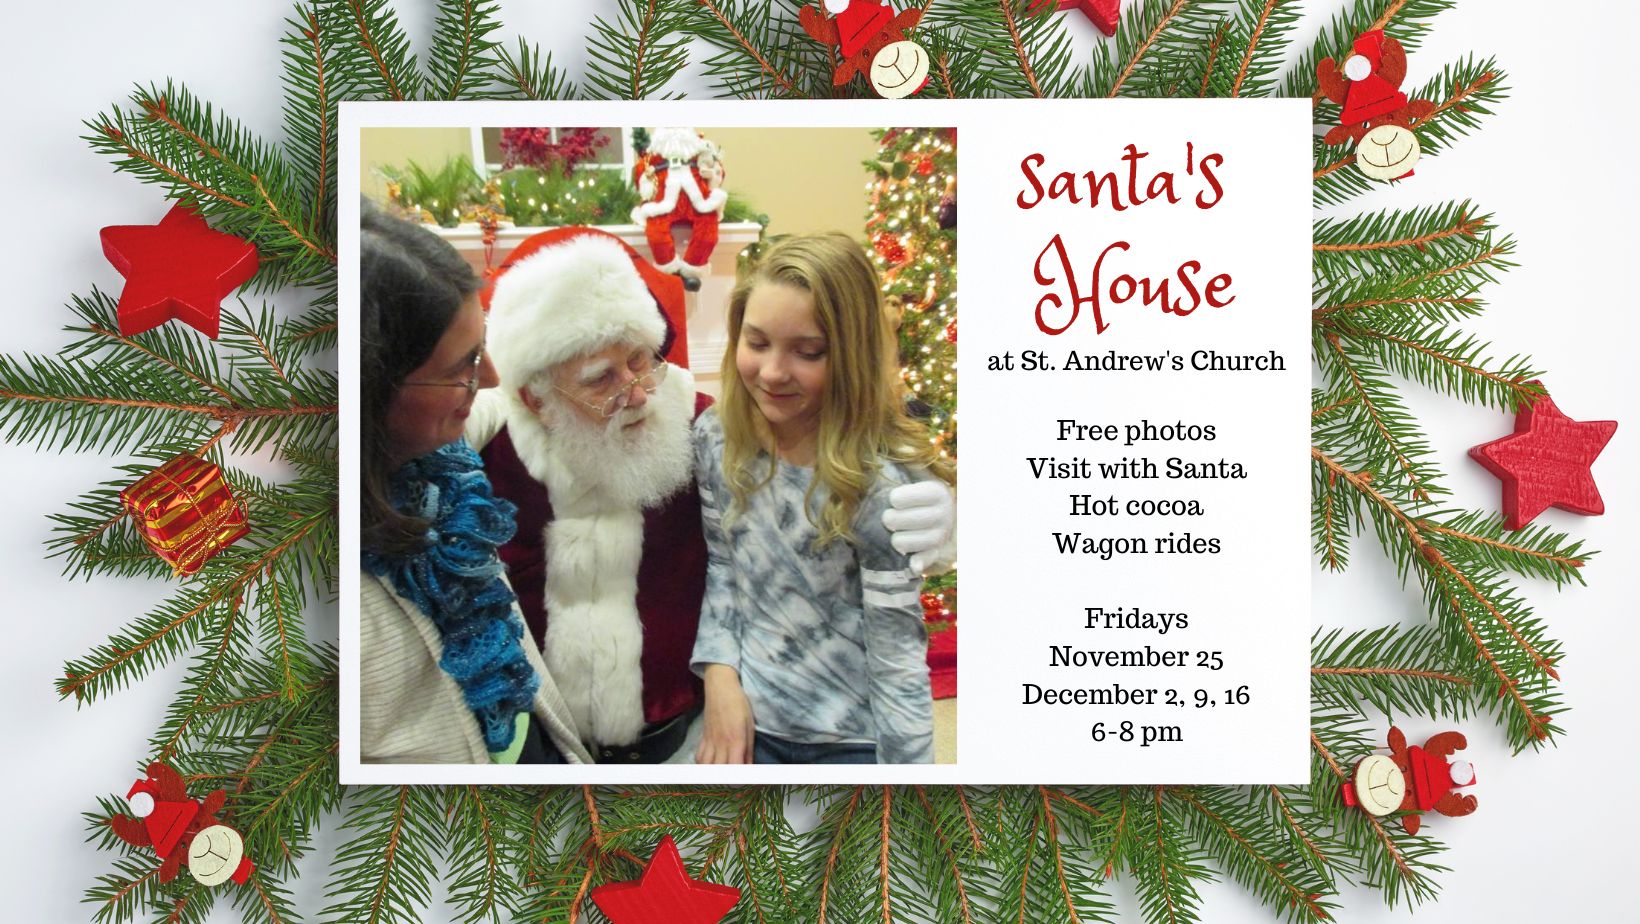 Featured image for Santa’s House Sponsored by the Kiwanis